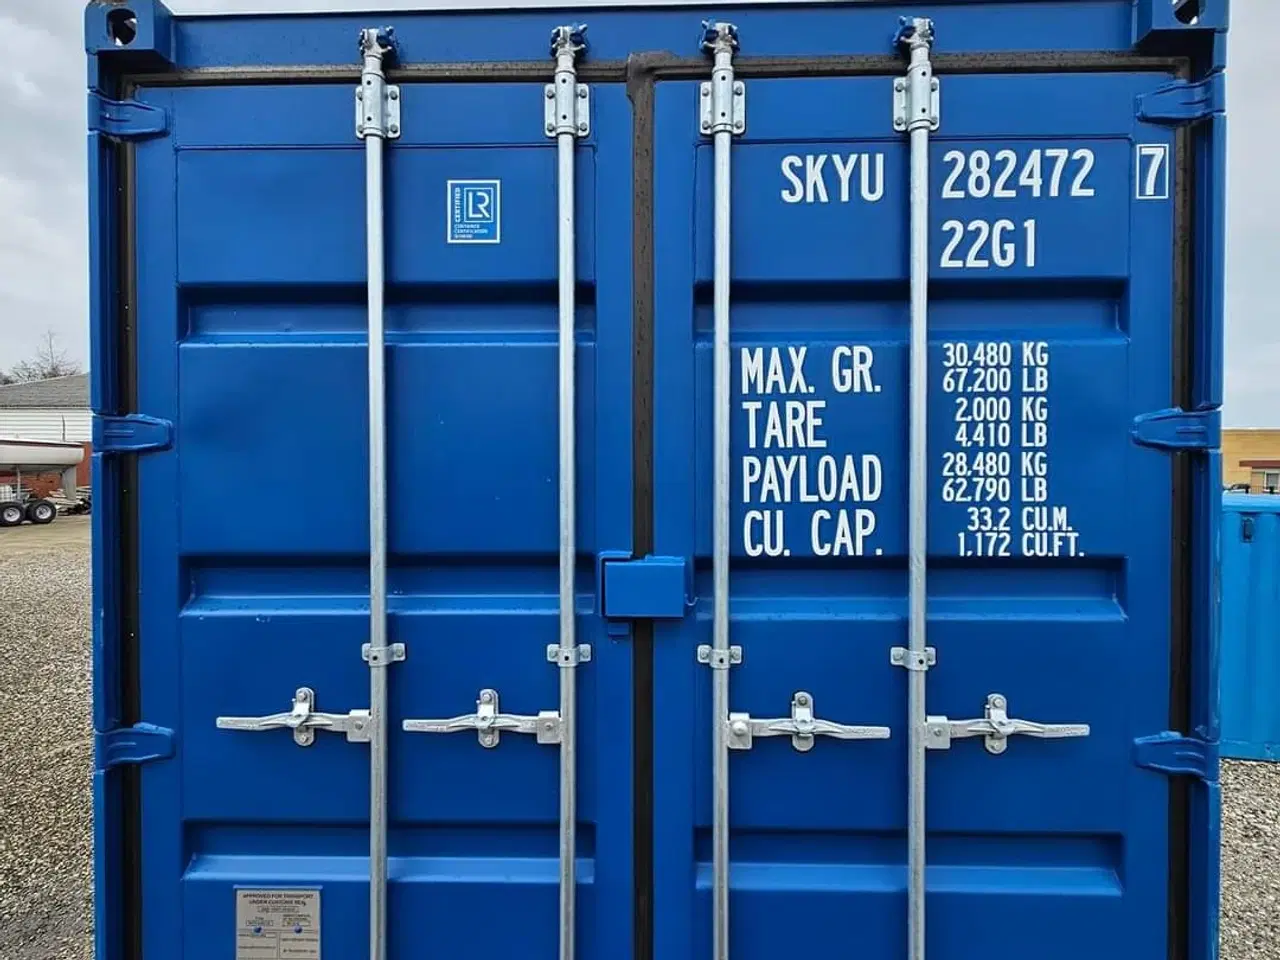 Billede 1 - Ny 20 fods container